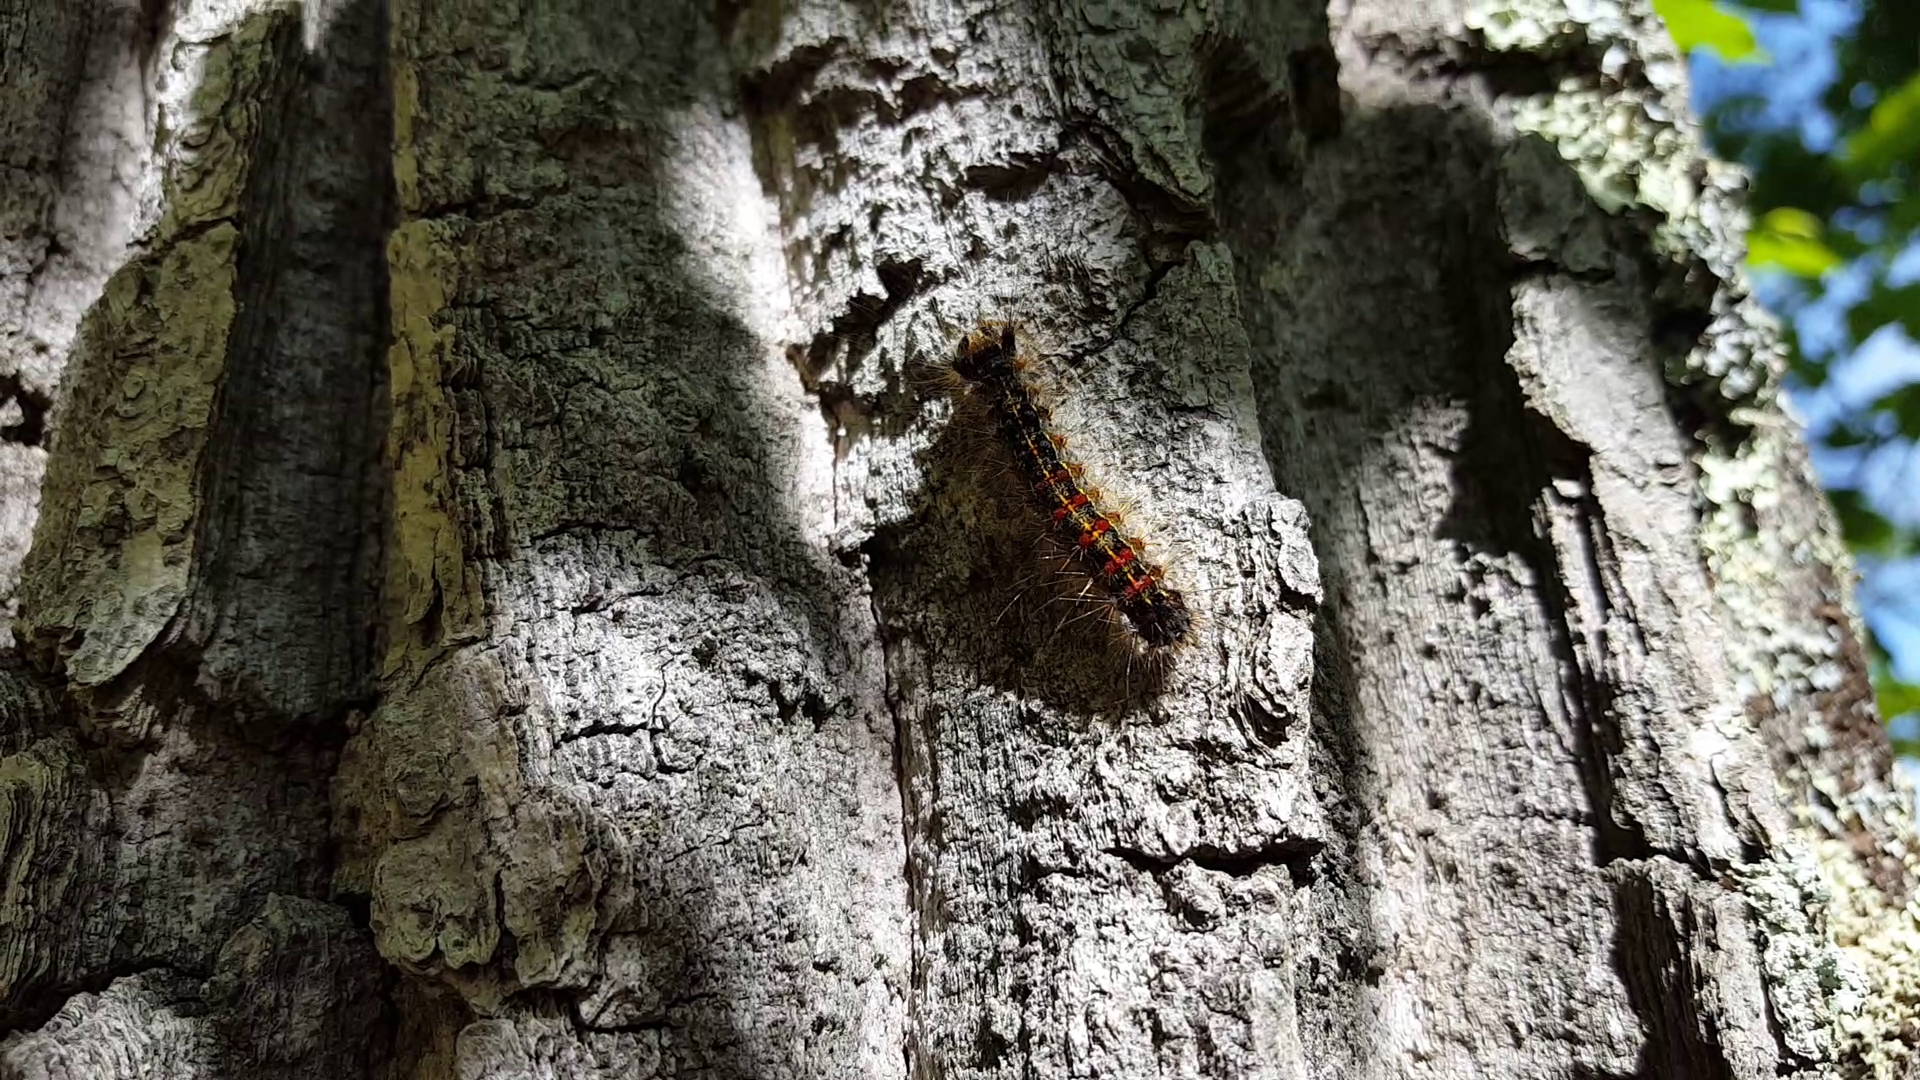 A spongy moth caterpillar was captured crawling a tree.